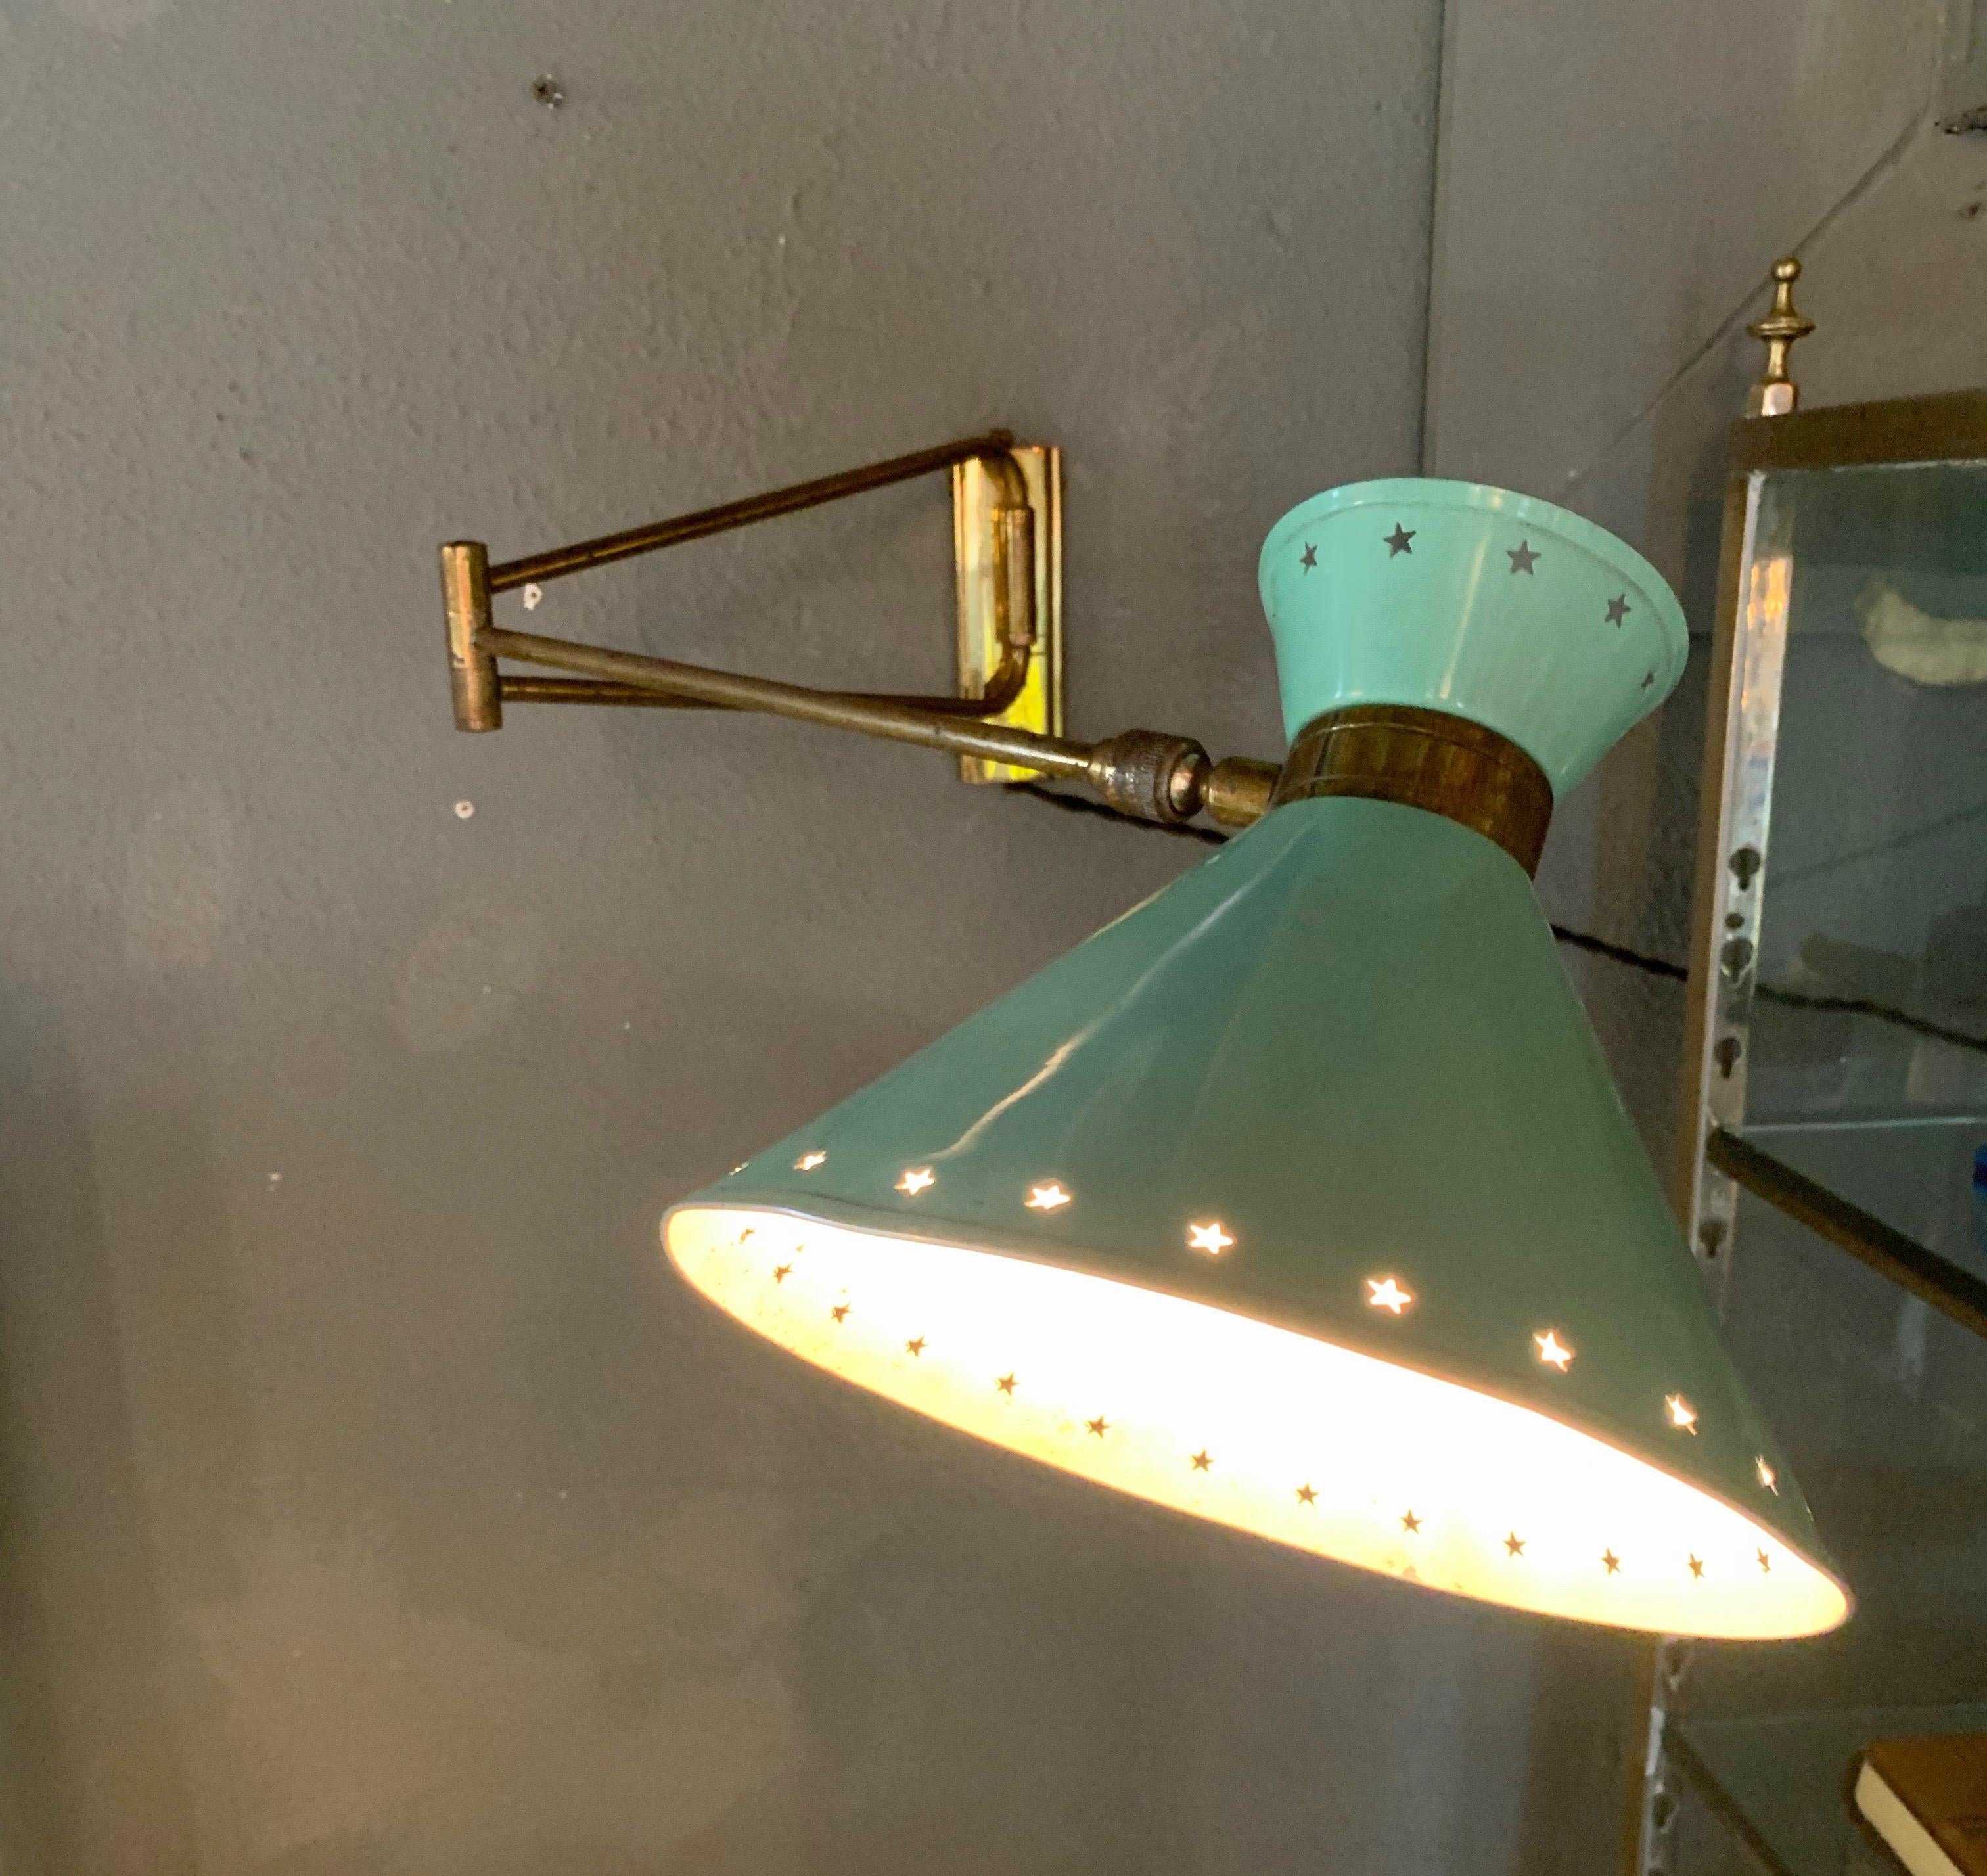 Fantastic articulating sconce by Lunel. Aluminum shade with original green paint, brass backplate, arms and hardware. Sconce pulls out from the wall or tucks in. Also able to angle the shade in different directions. Newly rewired. Good vintage